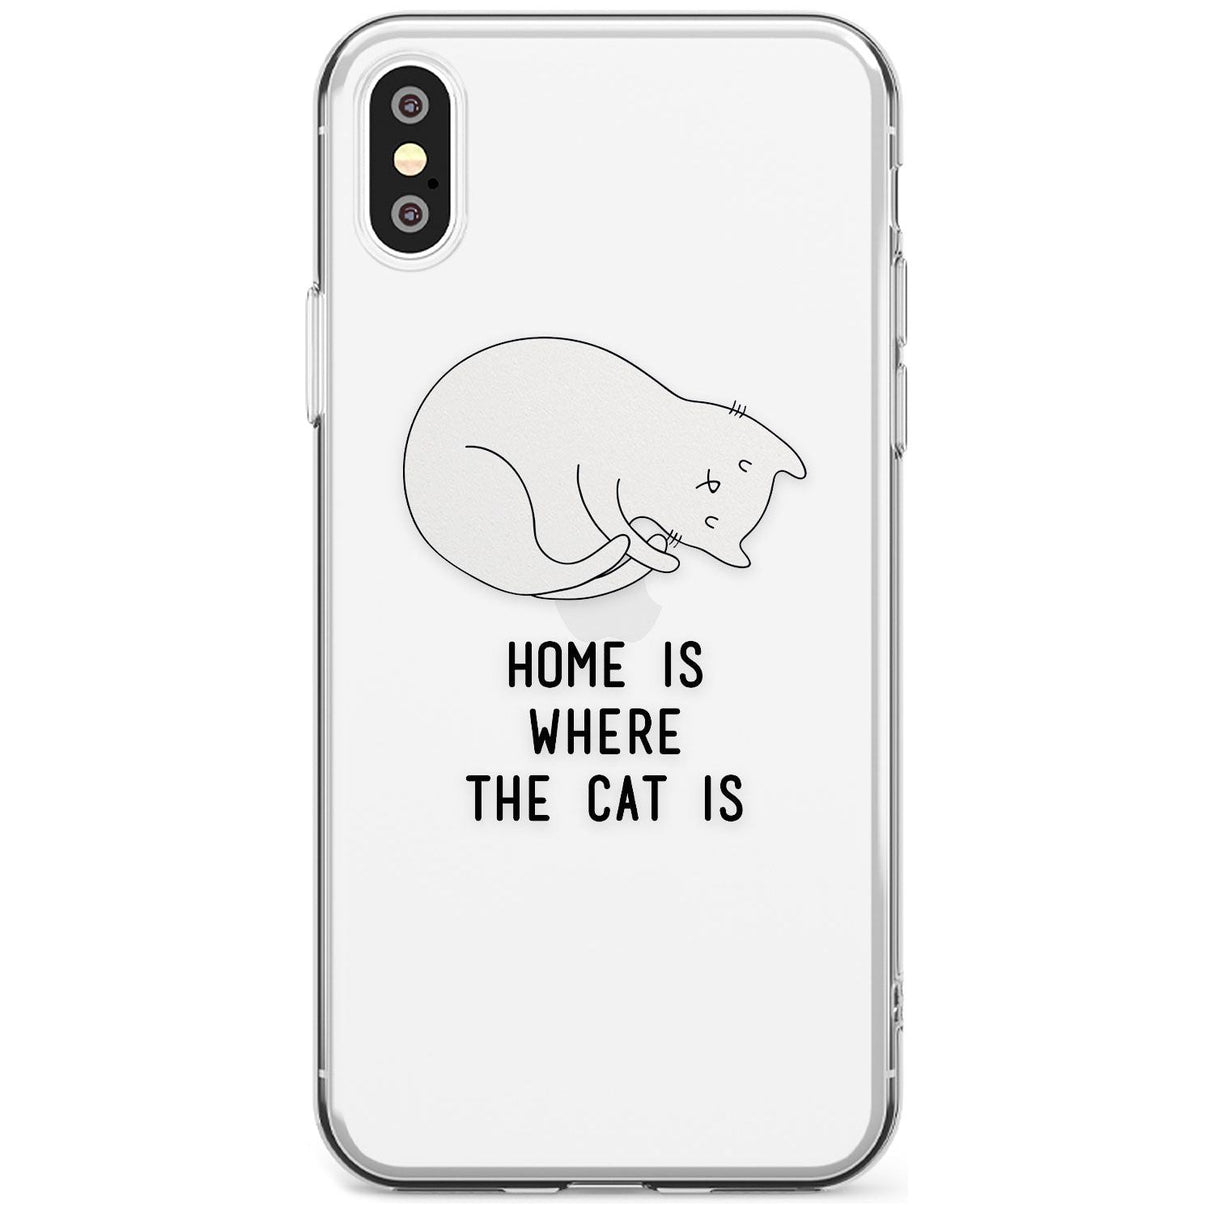 Home Is Where the Cat is Black Impact Phone Case for iPhone X XS Max XR